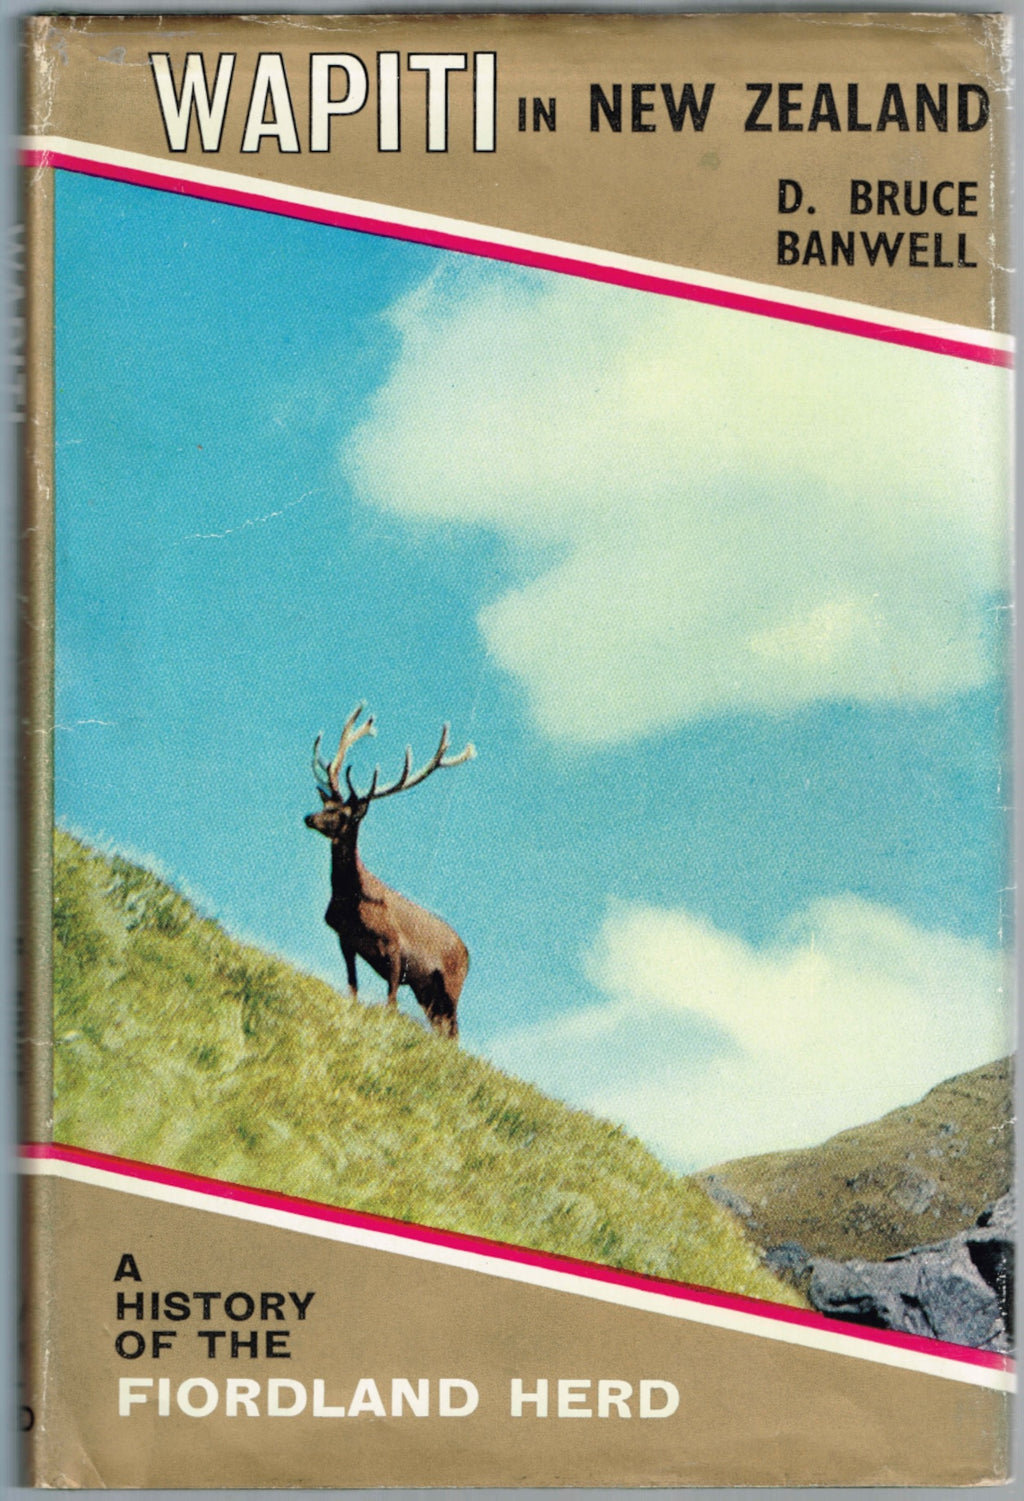 Wapiti in New Zealand. The Story of the Fiordland Herd by D. Bruce Banwell. [SIGNED FIRST EDITION]